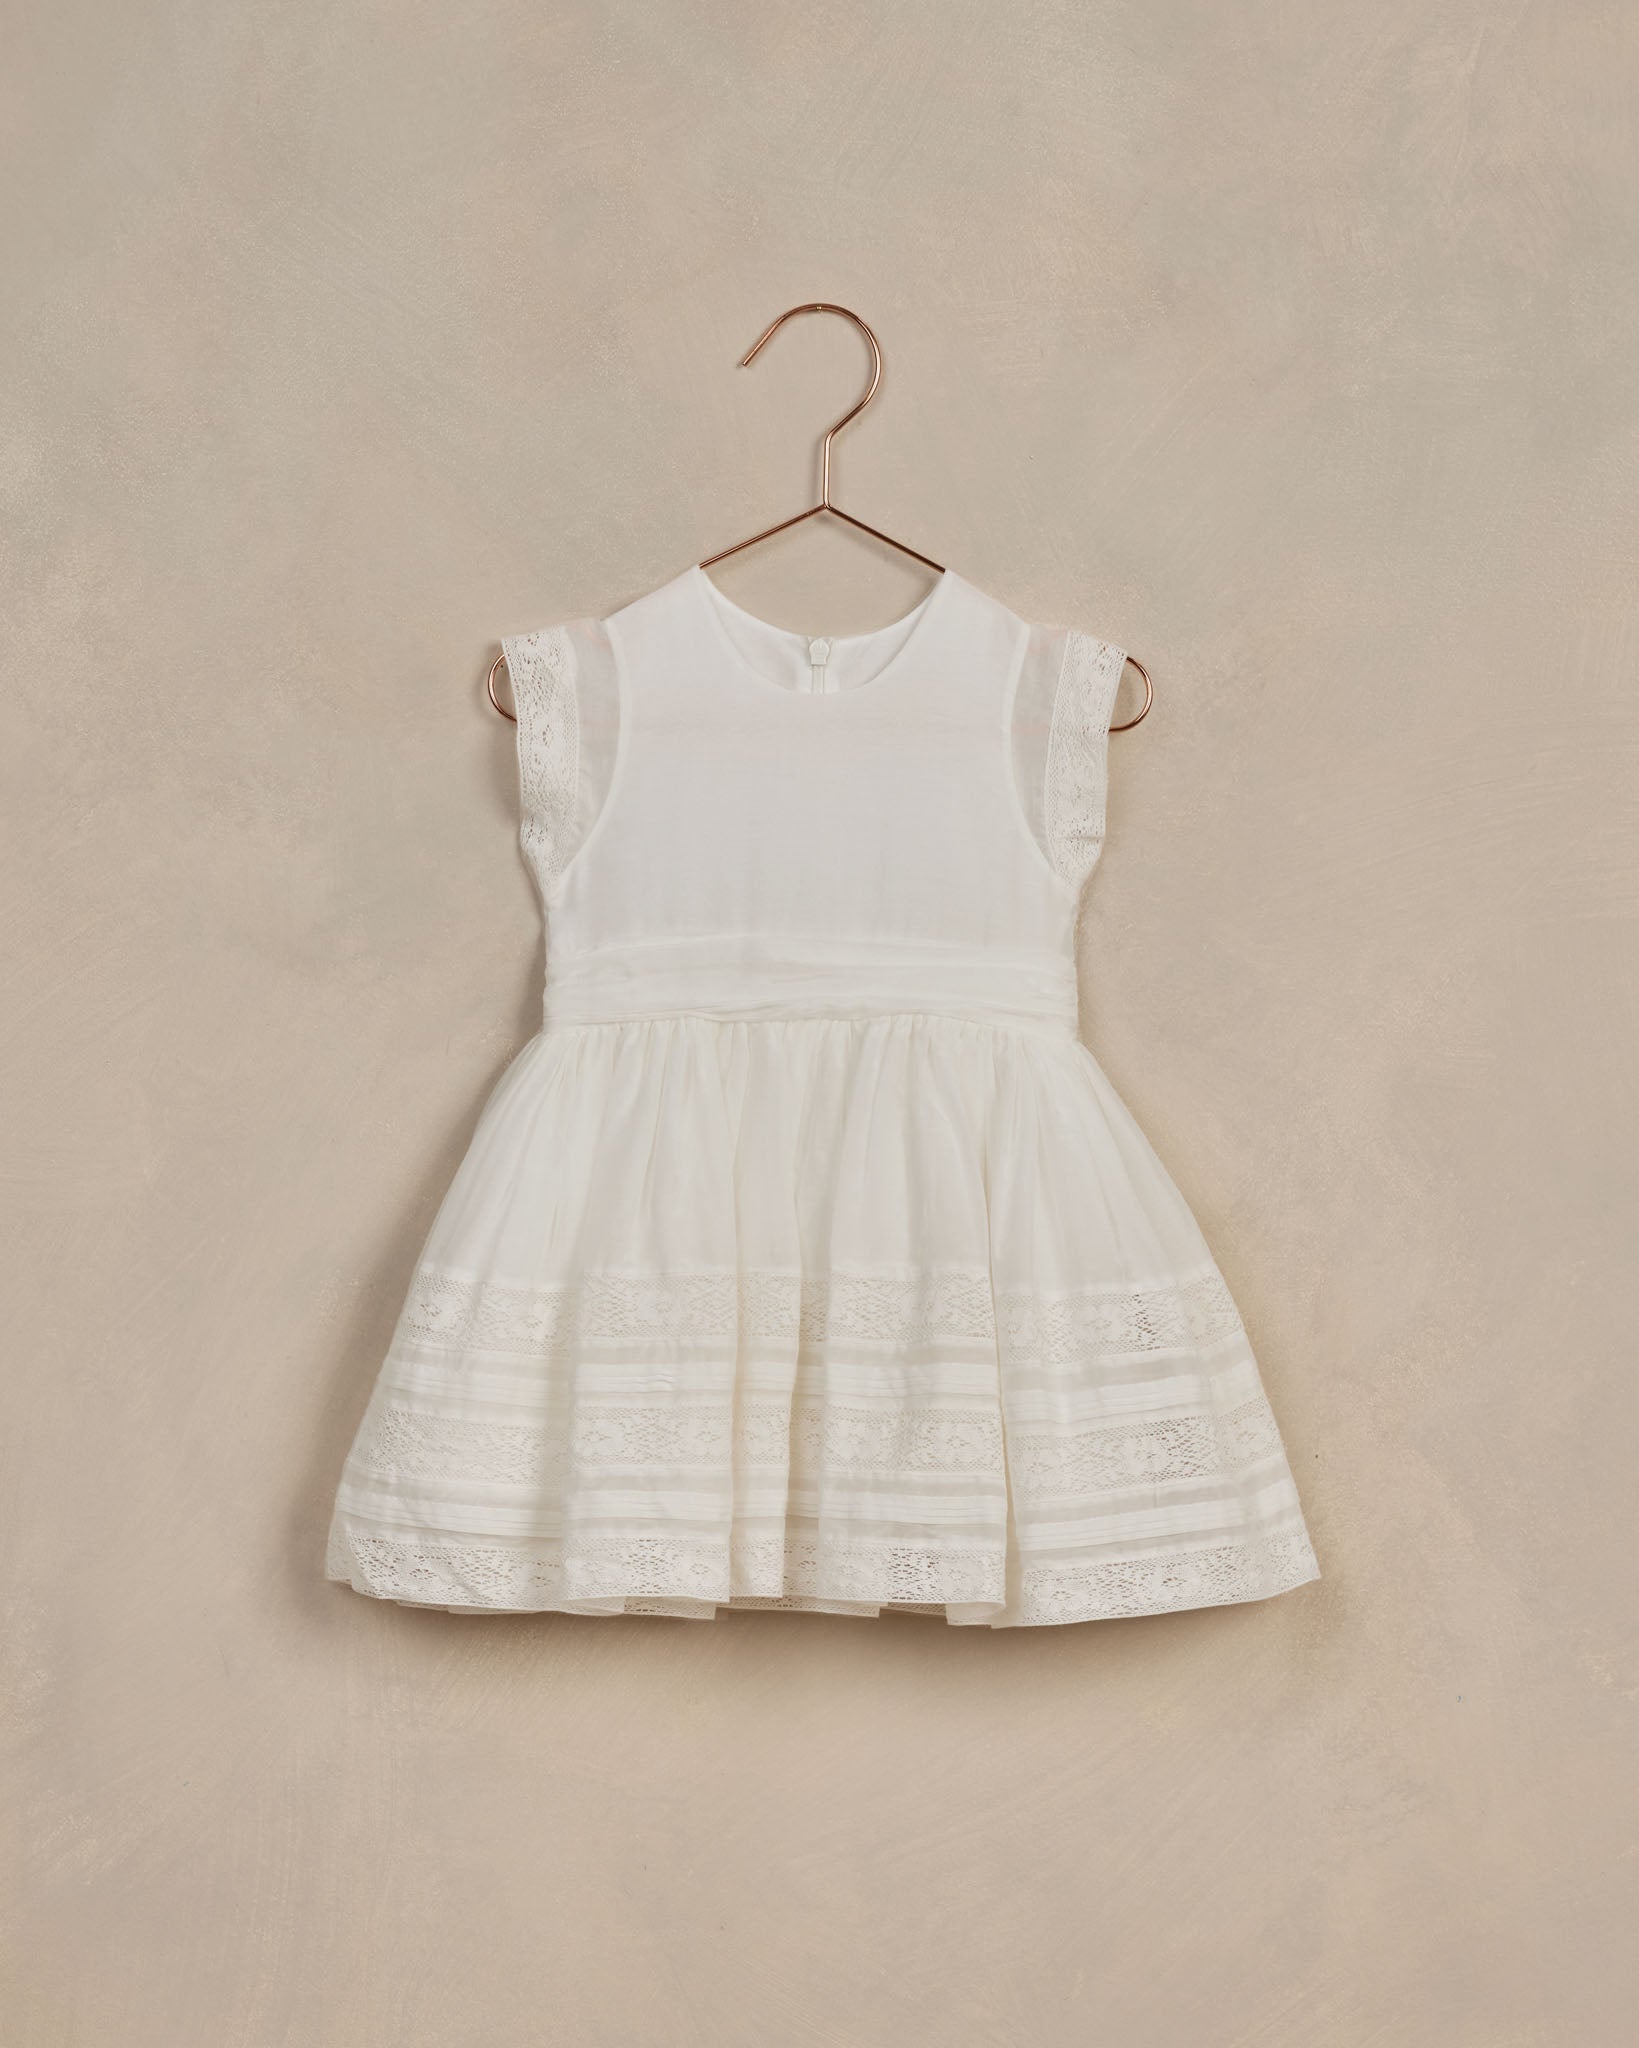 Dahlia Dress || White - Rylee + Cru | Kids Clothes | Trendy Baby Clothes | Modern Infant Outfits |